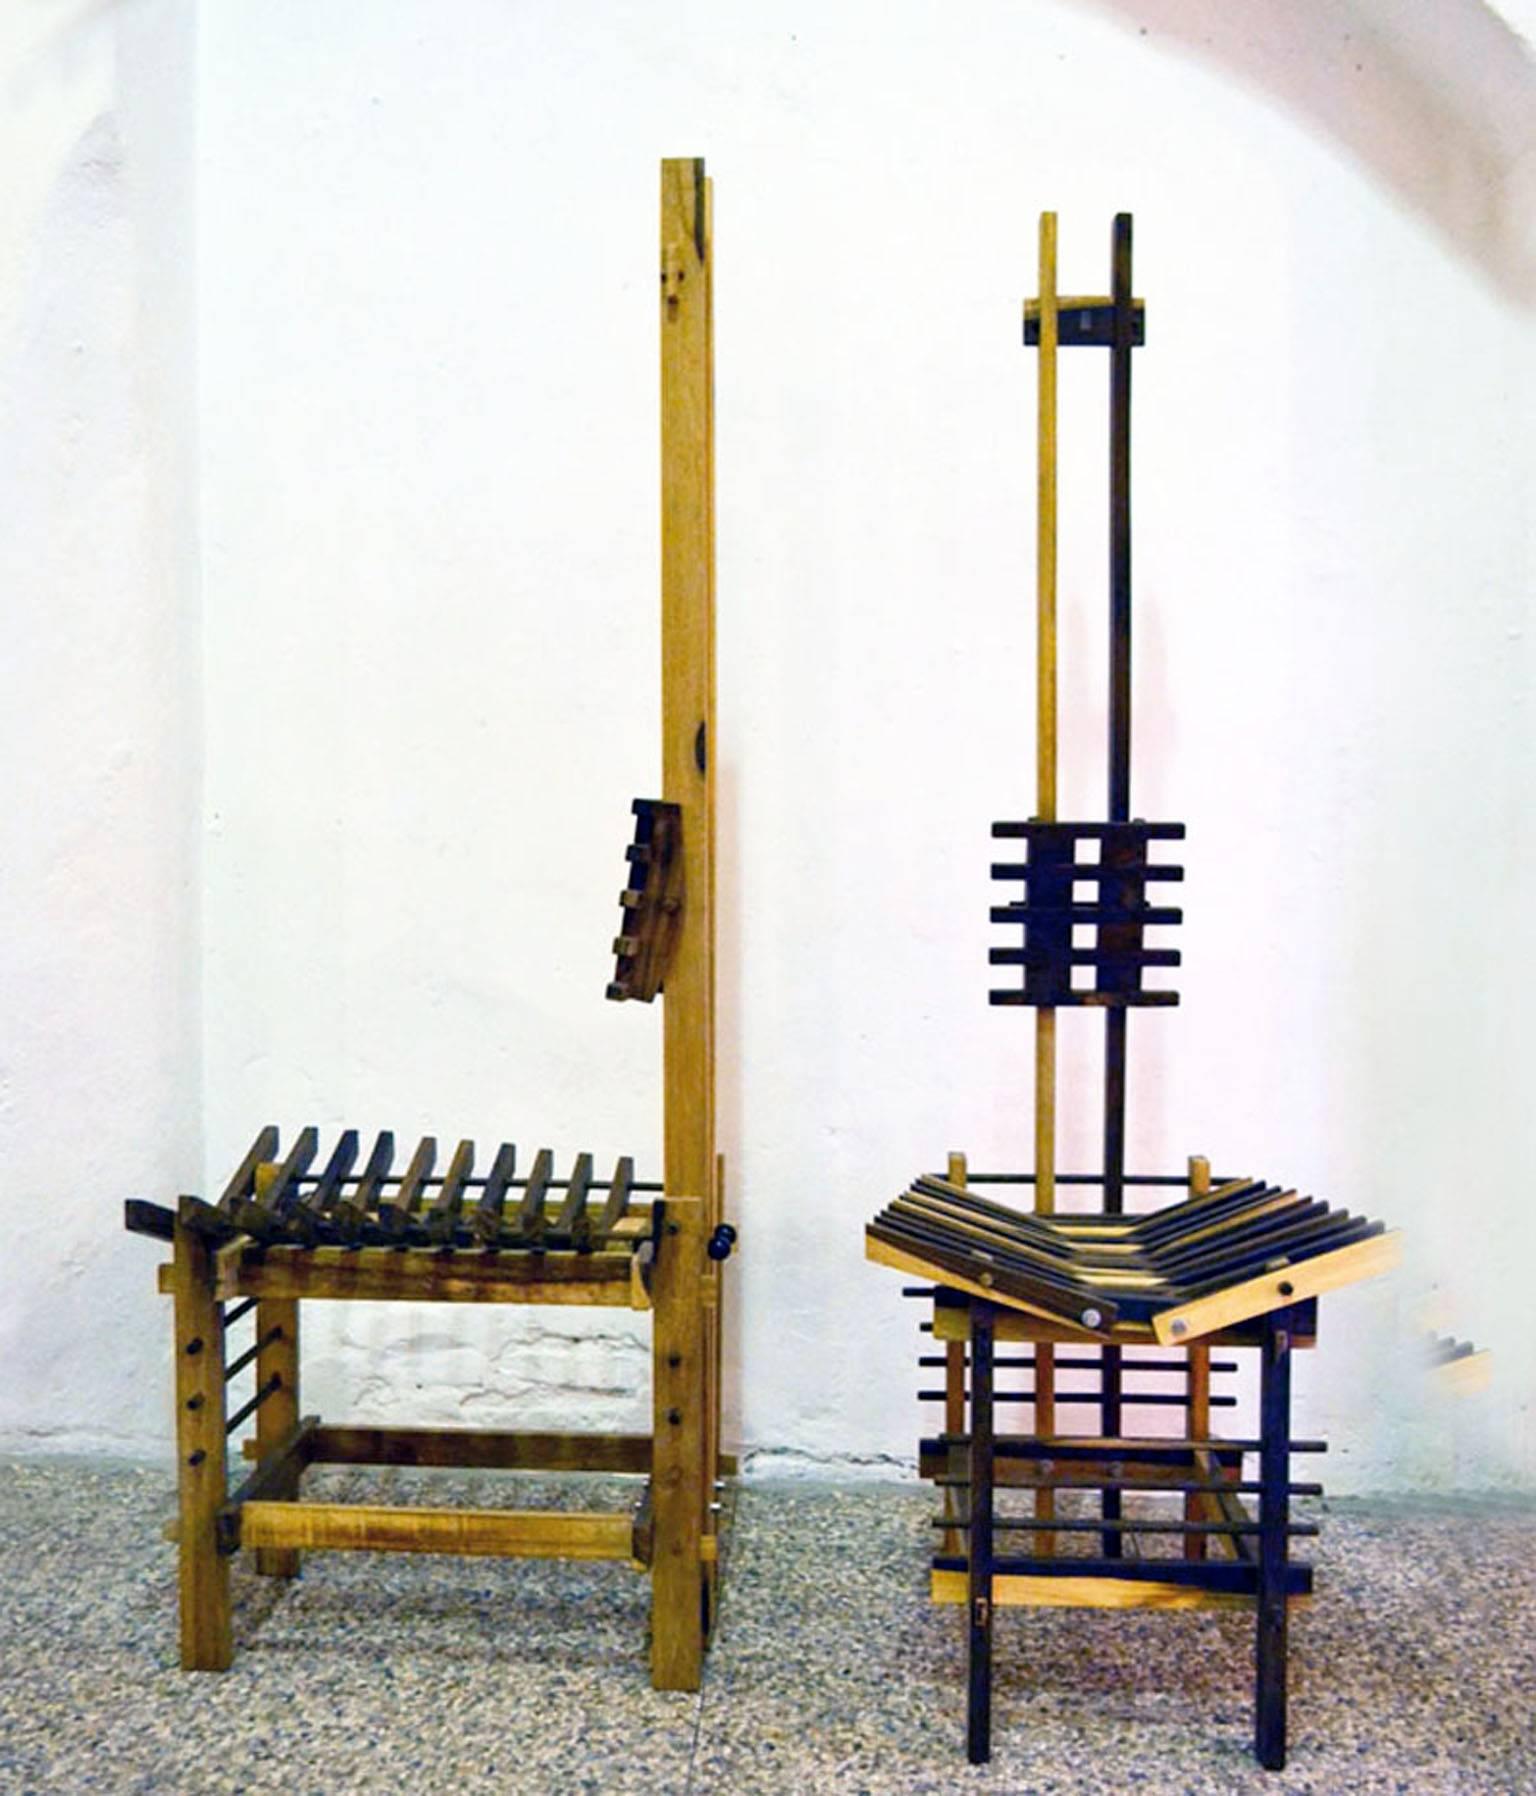 Pair of sculpture chairs made of “Sano” Indonesian wood made by Anacleto Spazzapan in the 1990s.
Wholly interlocking, without the use of screws or nails.
Limited edition of 12 pieces.